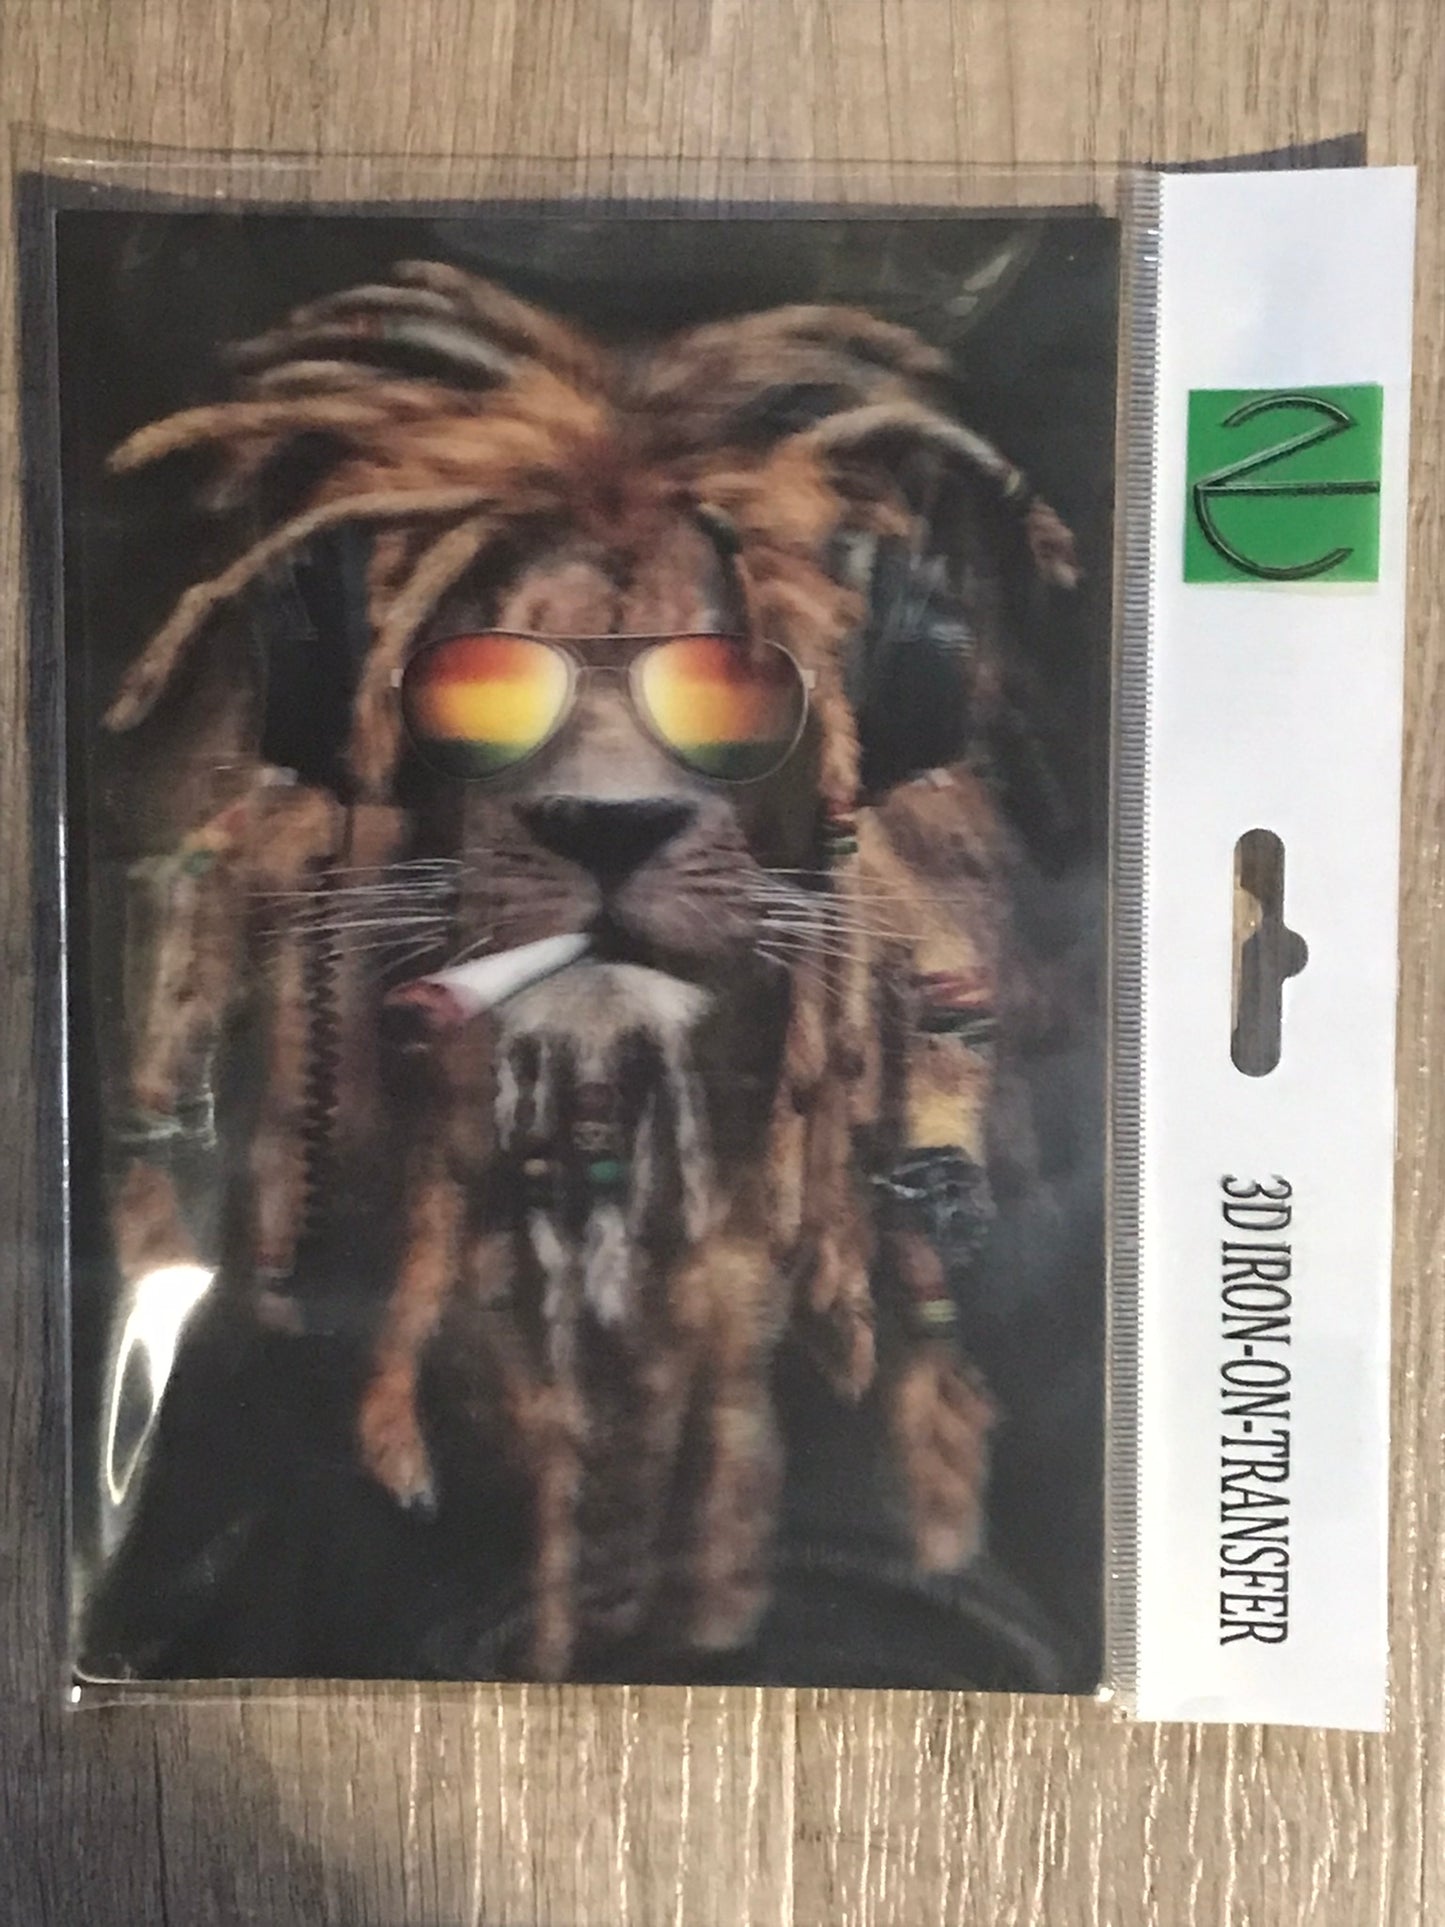 RASTA LION 3D LENTICULAR IRON-ON TRANSFER FOR CLOTHING AND ACCESSORIES